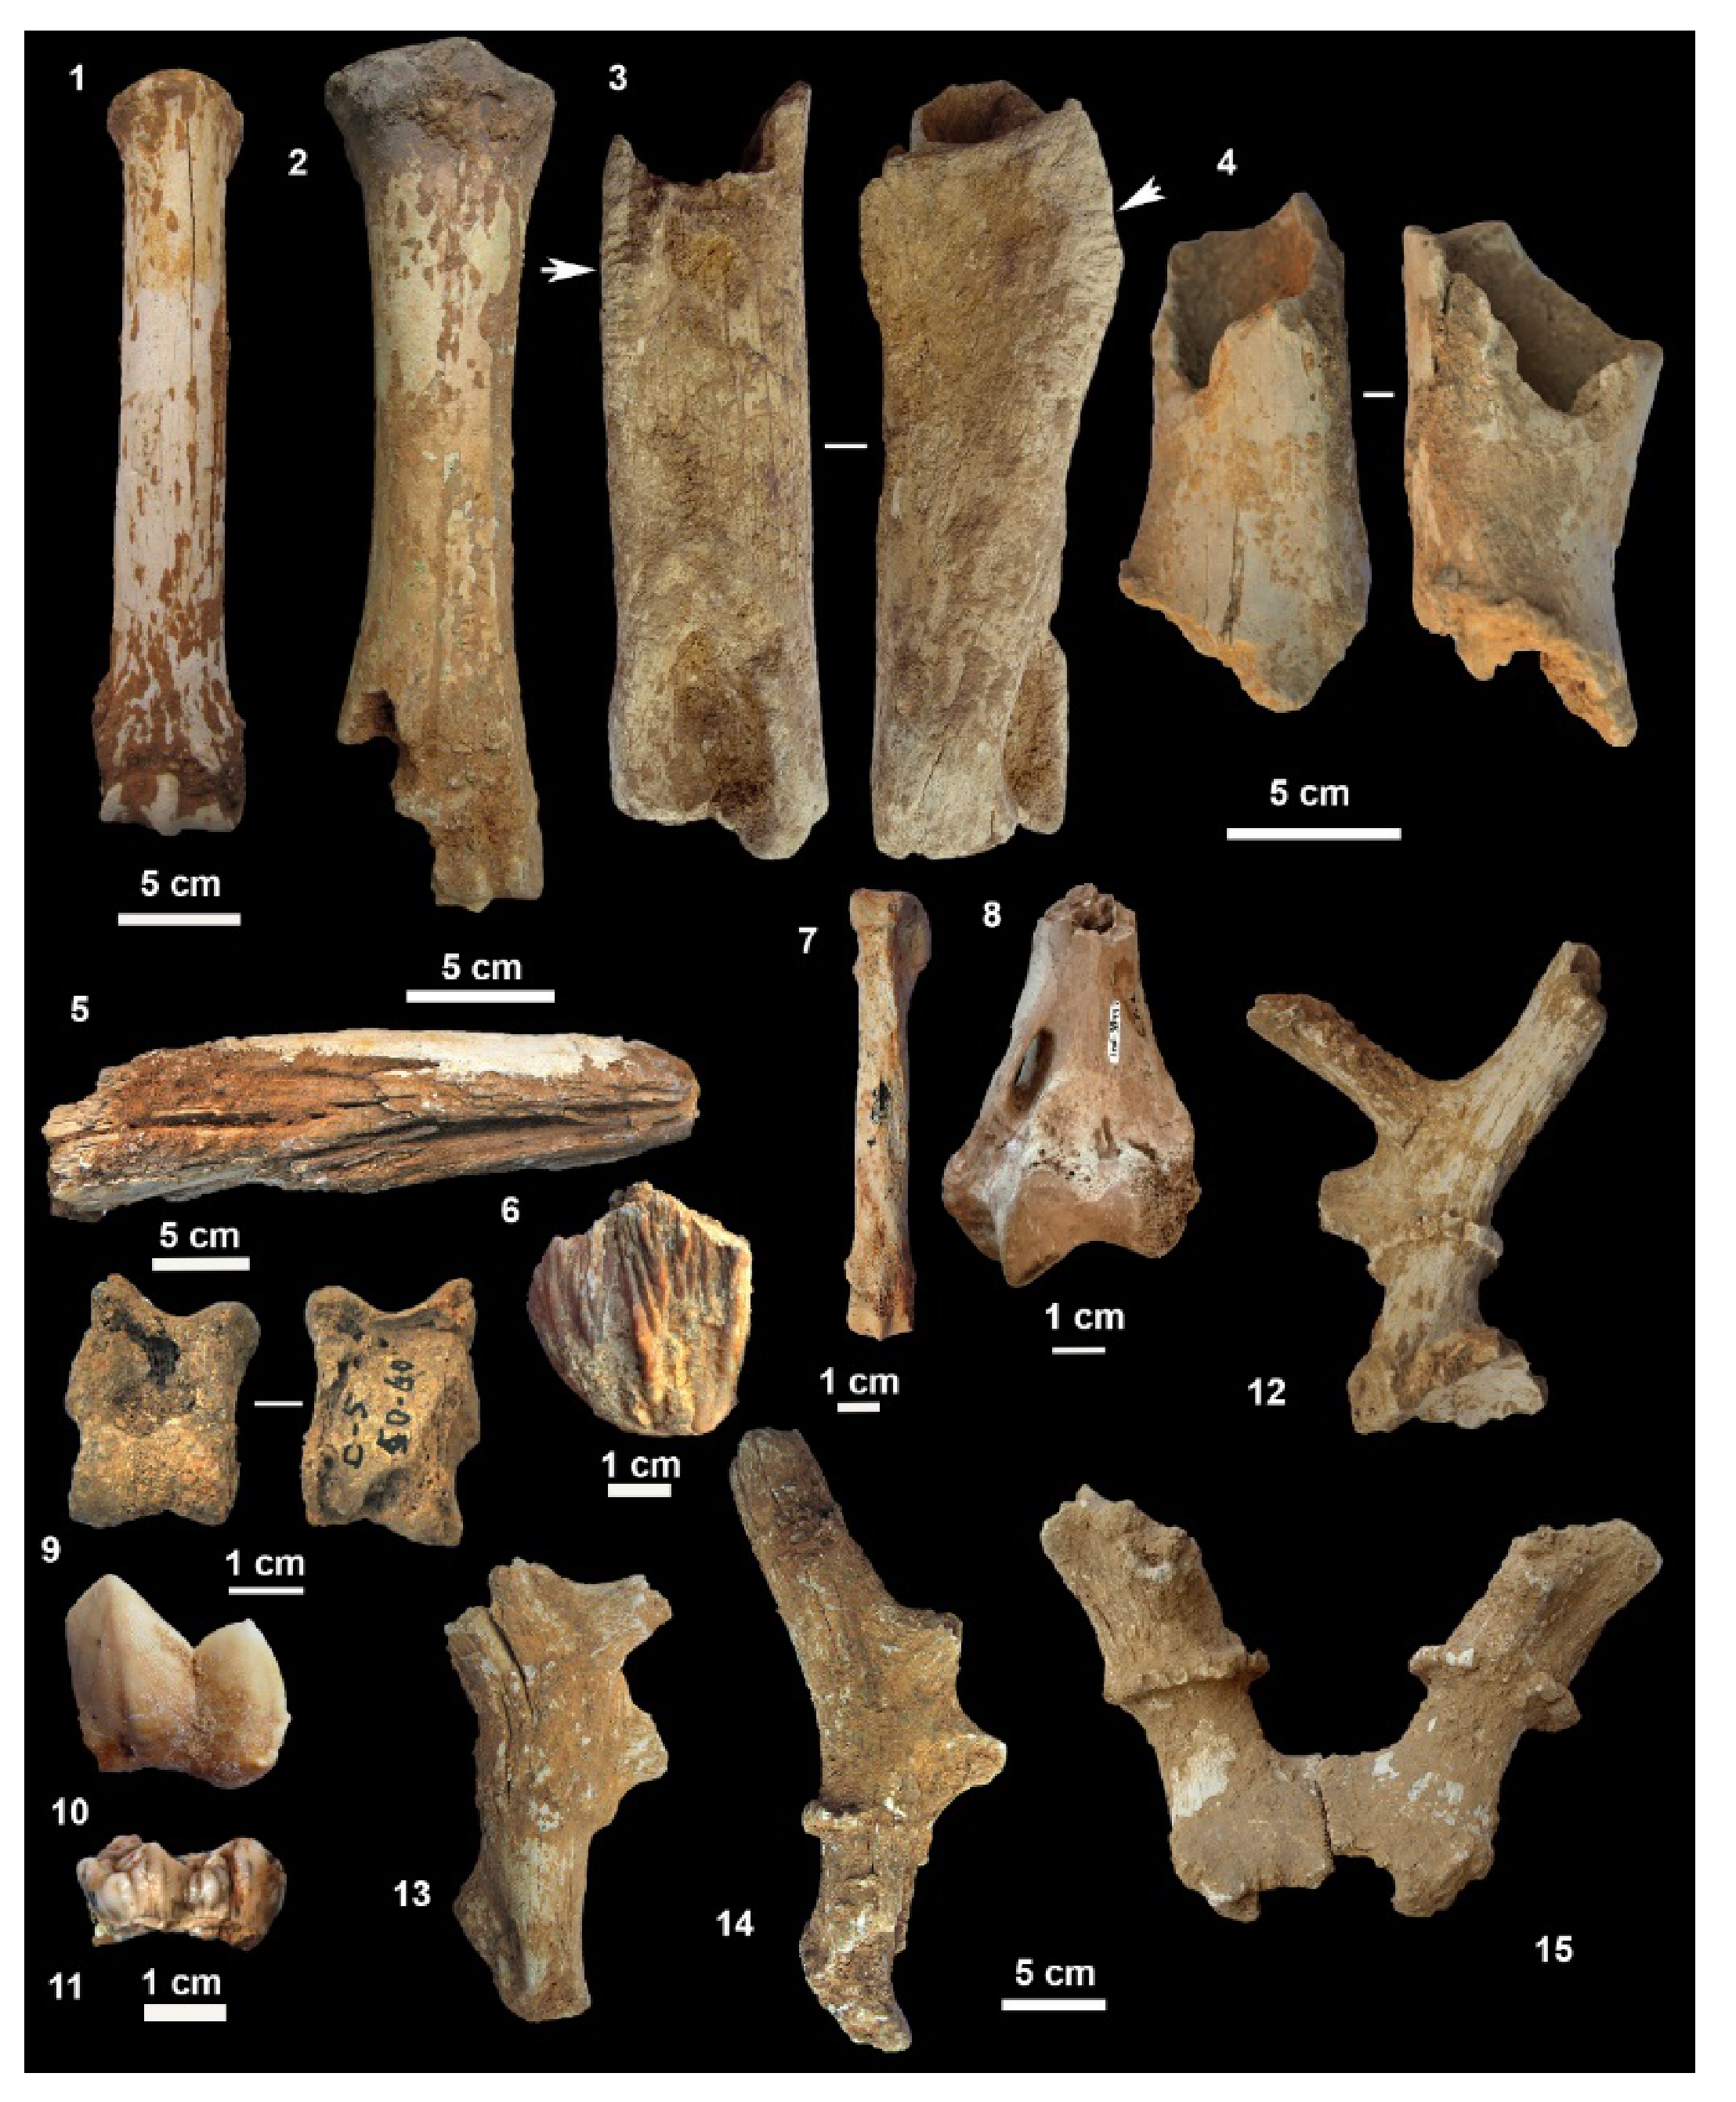 Quaternary | Free Full-Text | Neanderthal Fossils, Mobile Toolkit and a  Hyena Den: The Archaeological Assemblage of Lateral Gallery 1 in Cova Del  Gegant (NE Iberian Peninsula) | HTML